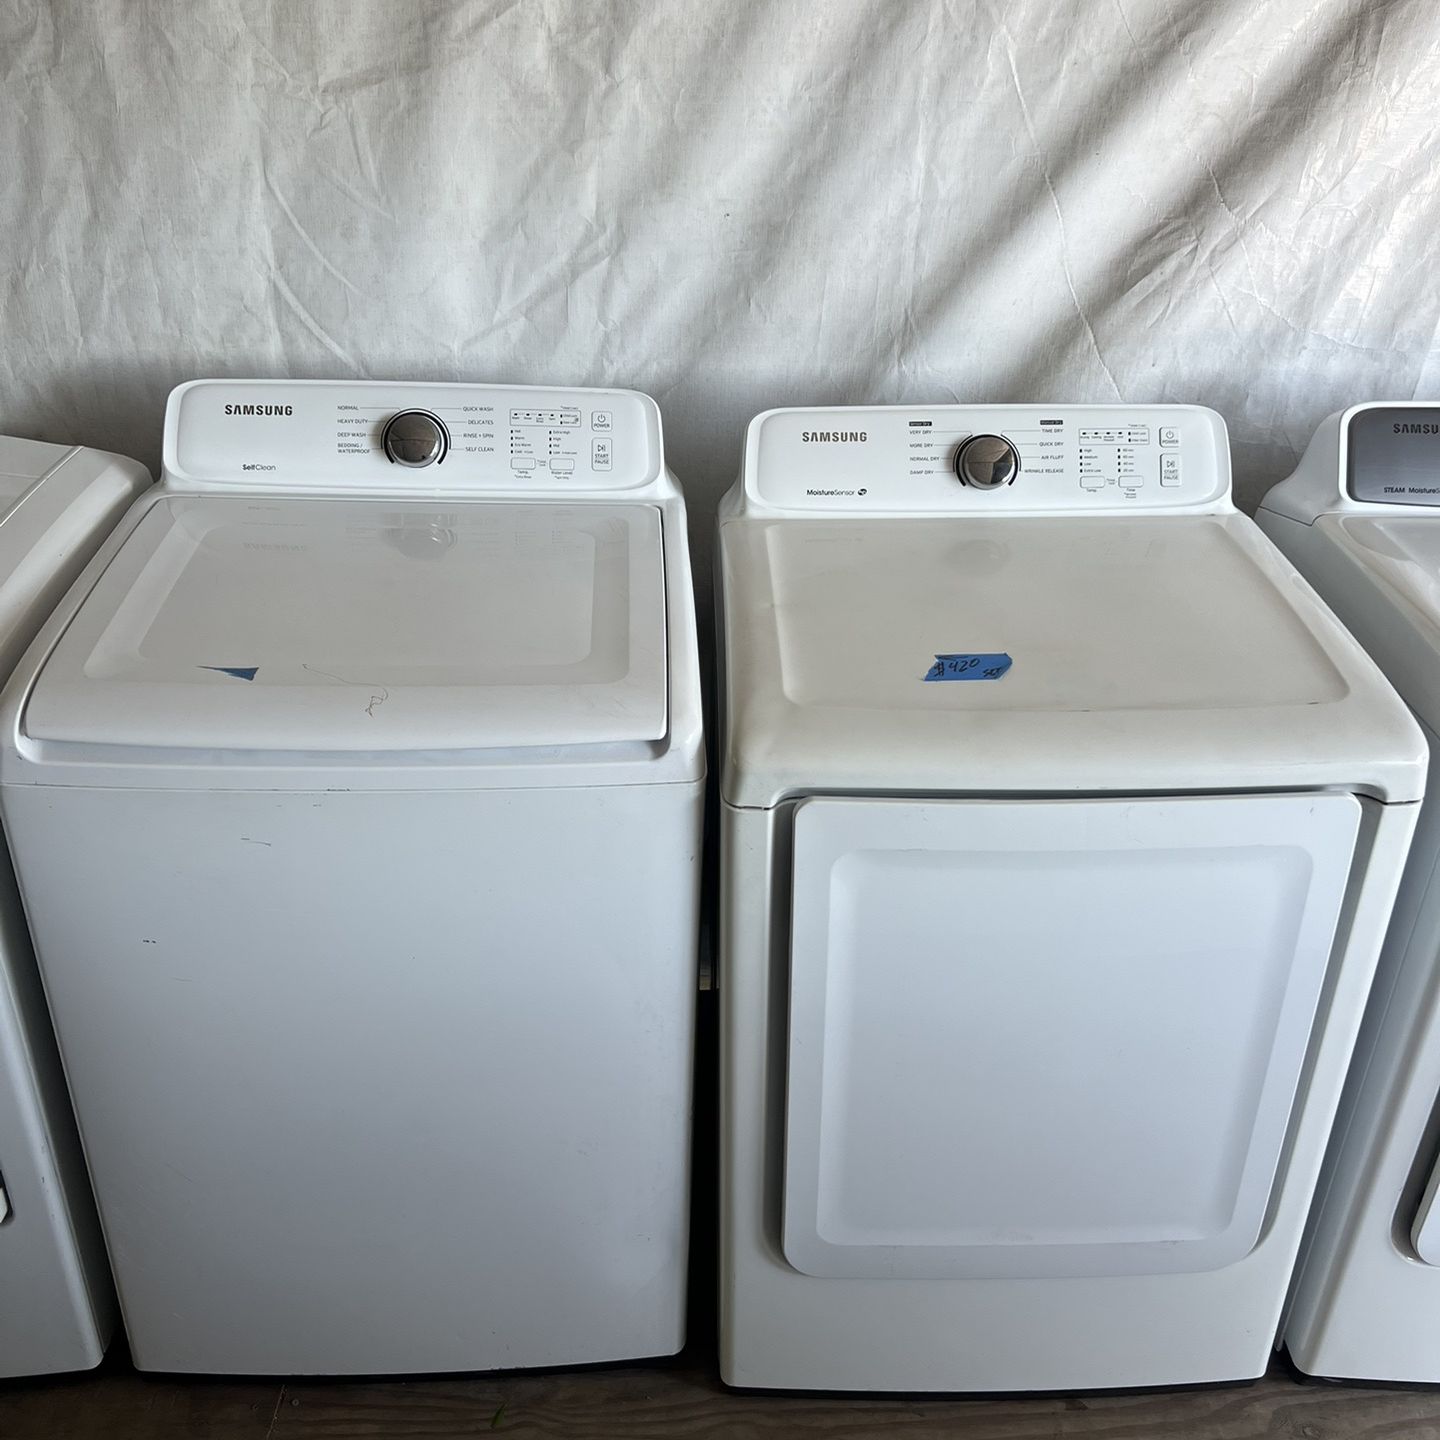 Samsung Washer&dryer Large Capacity Set   60 day warranty/ Located at:📍5415 Carmack Rd Tampa Fl 33610📍